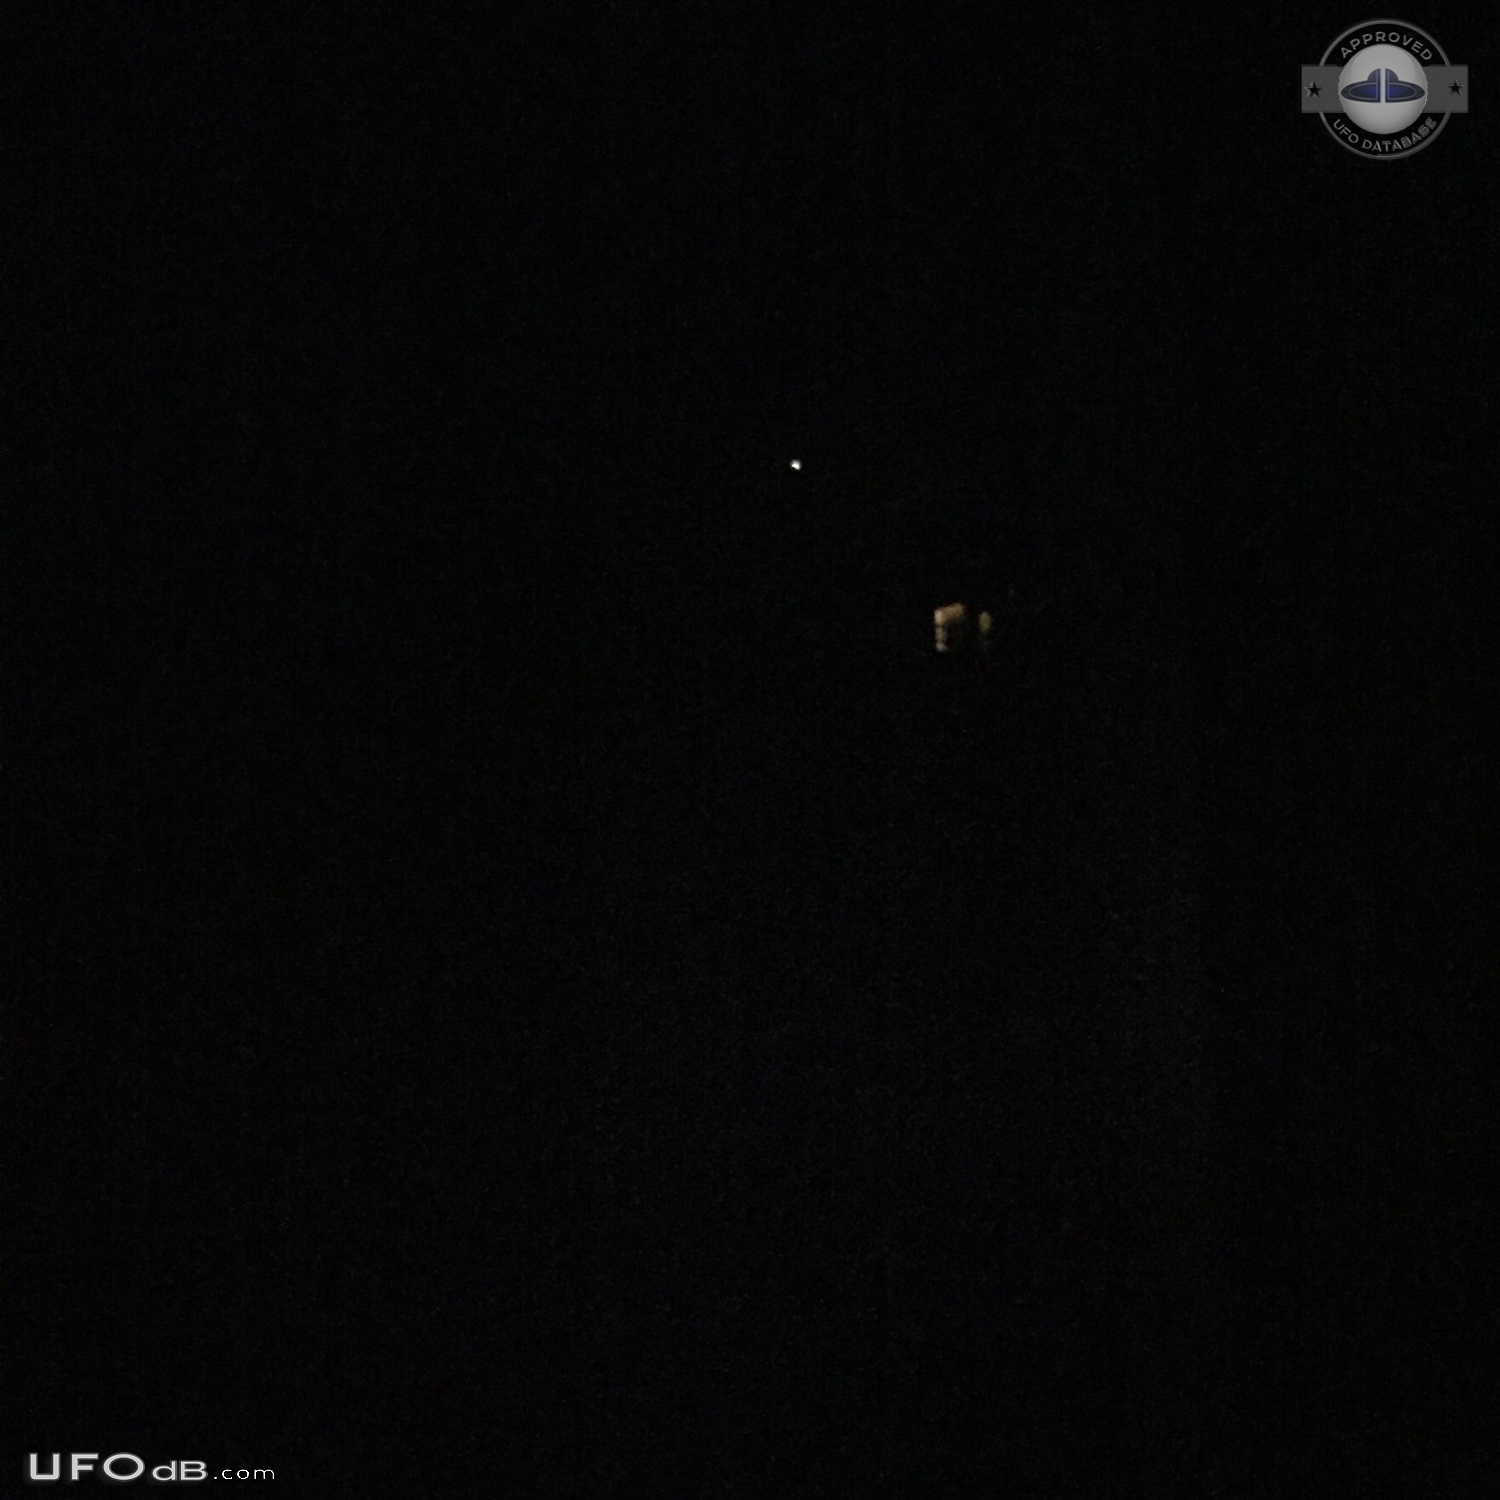 Wife see strange looking UFO and take picture - Pawling New York USA 2 UFO Picture #785-1